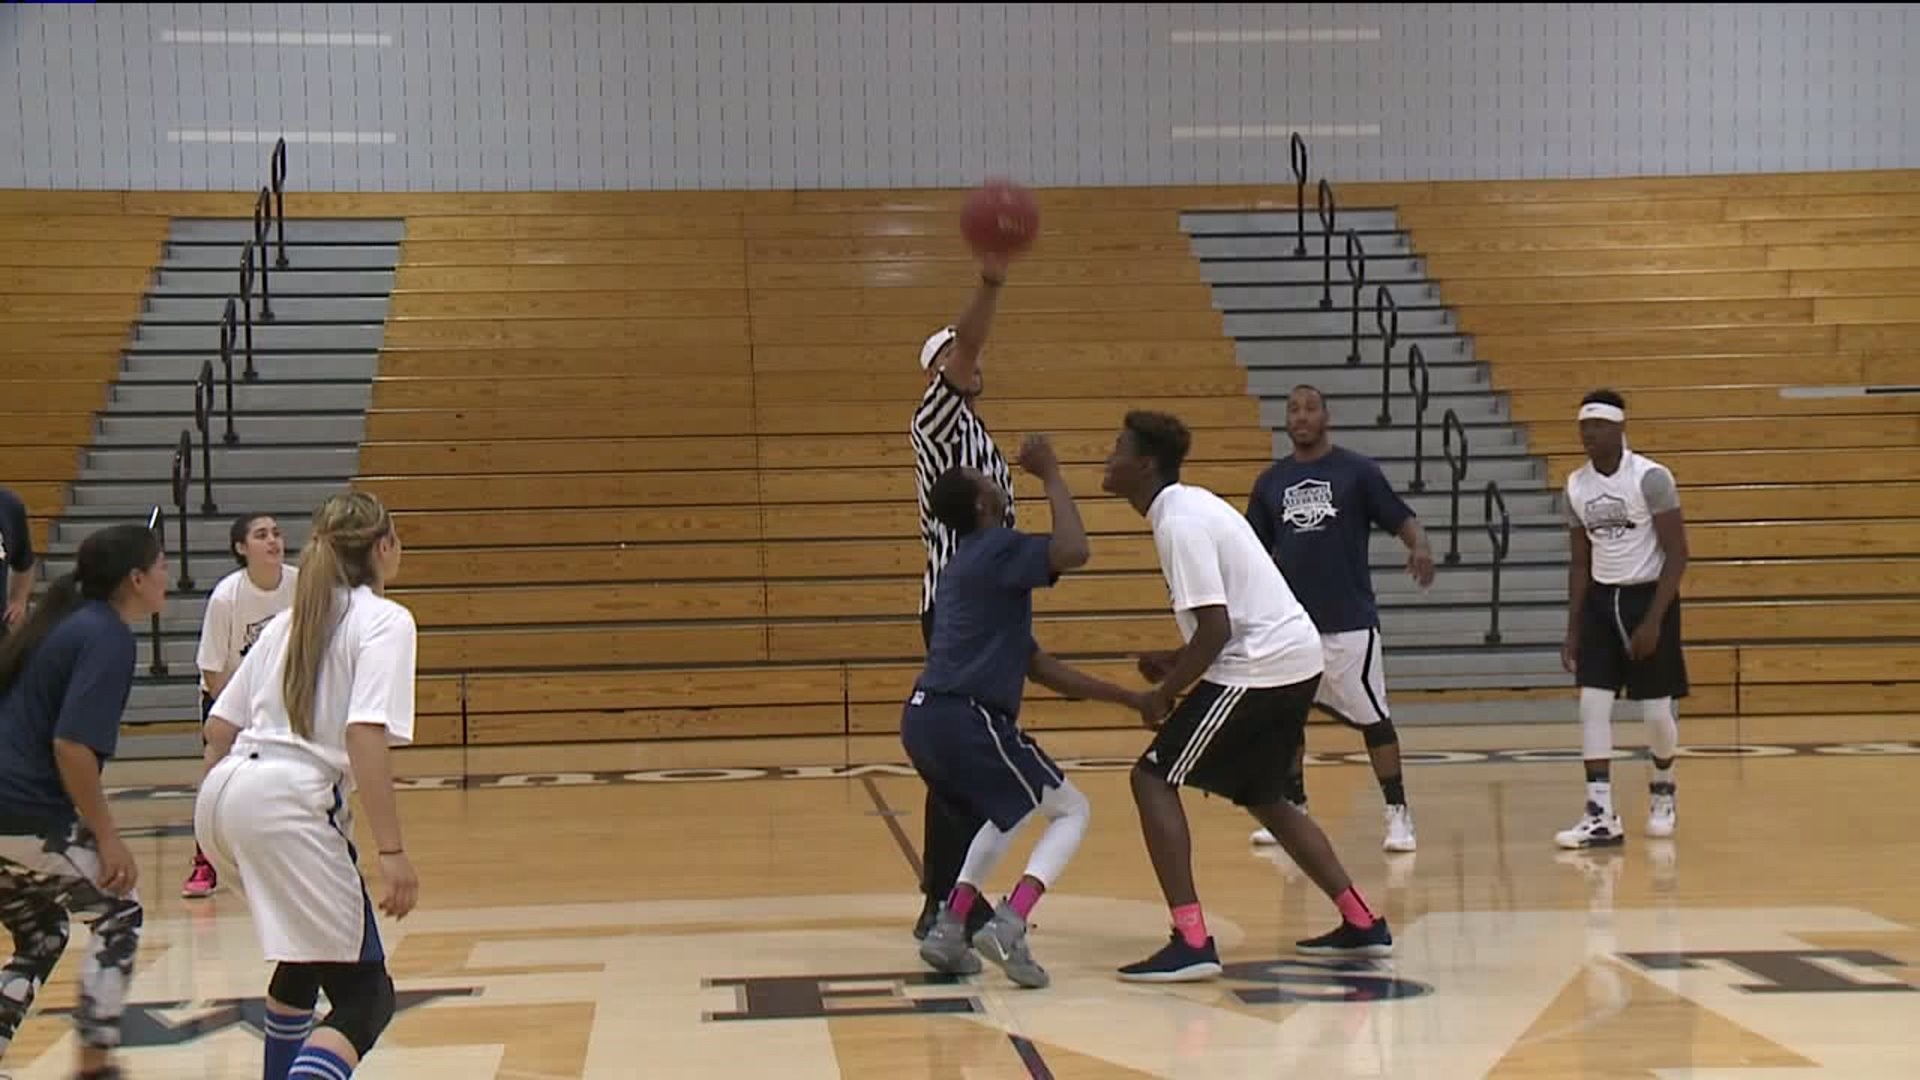 Students Take on Police on Basketball Court